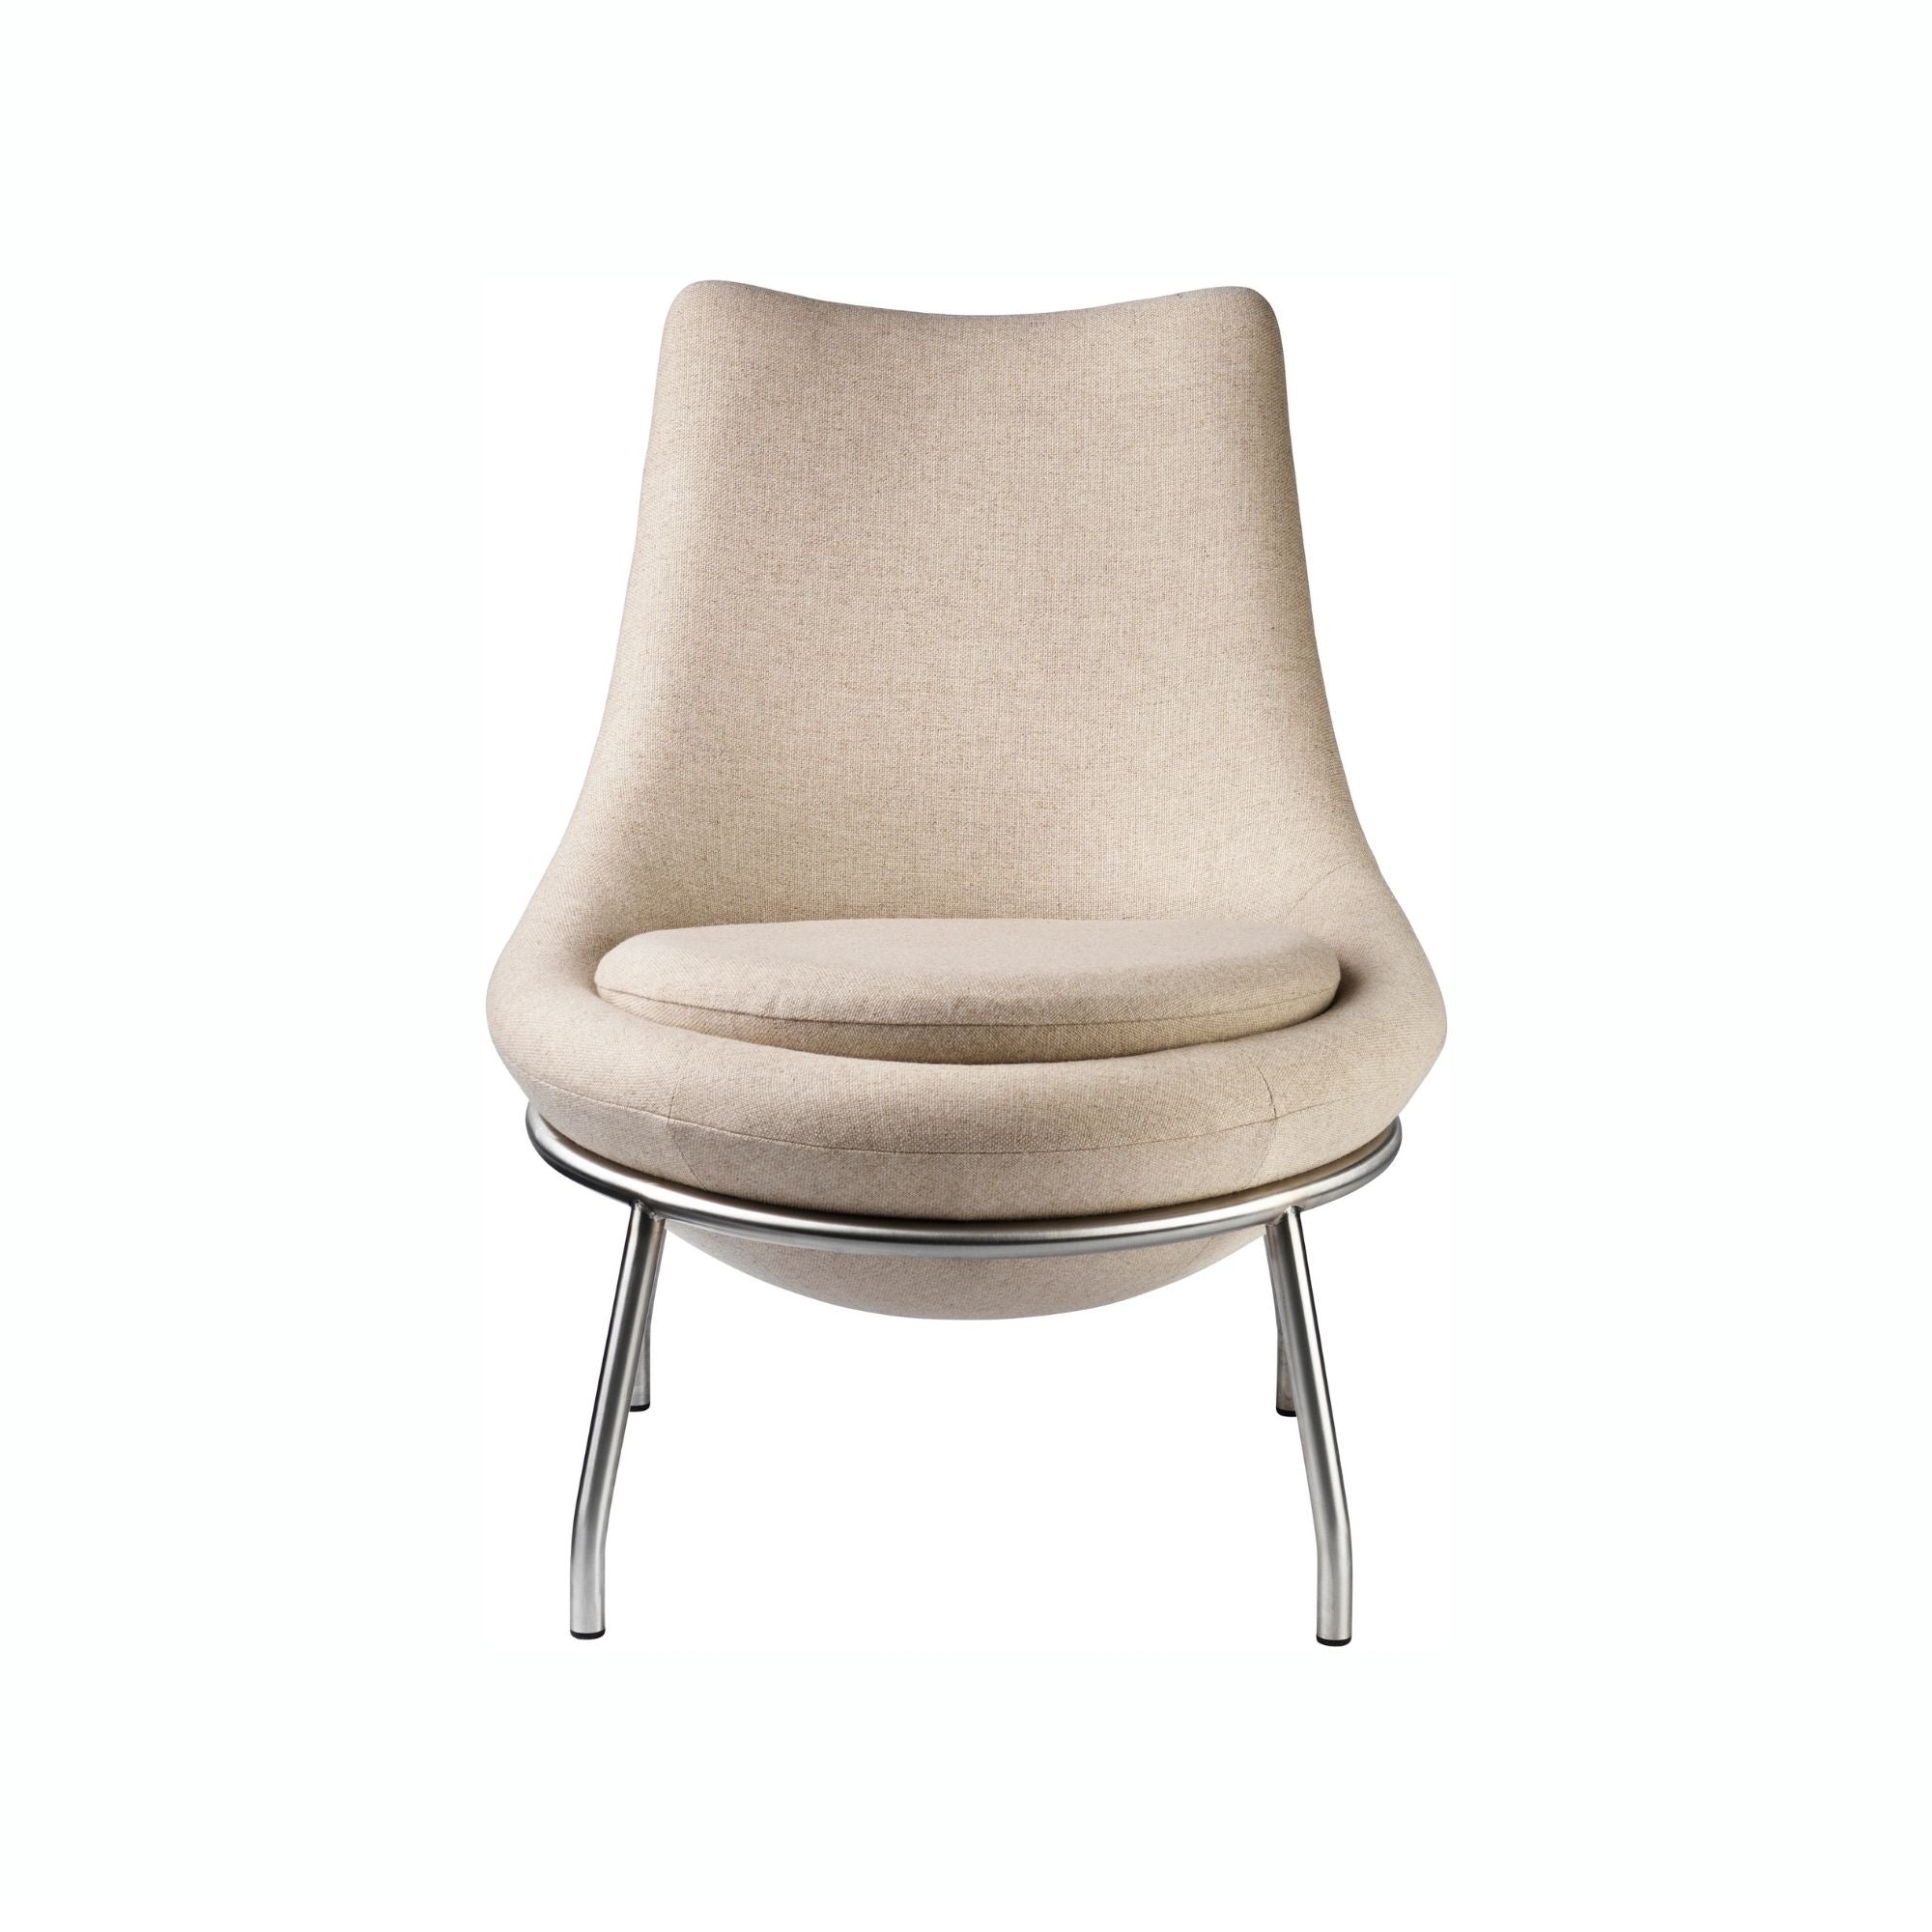 L40 Bellamie Lounge Chair - THAT COOL LIVING